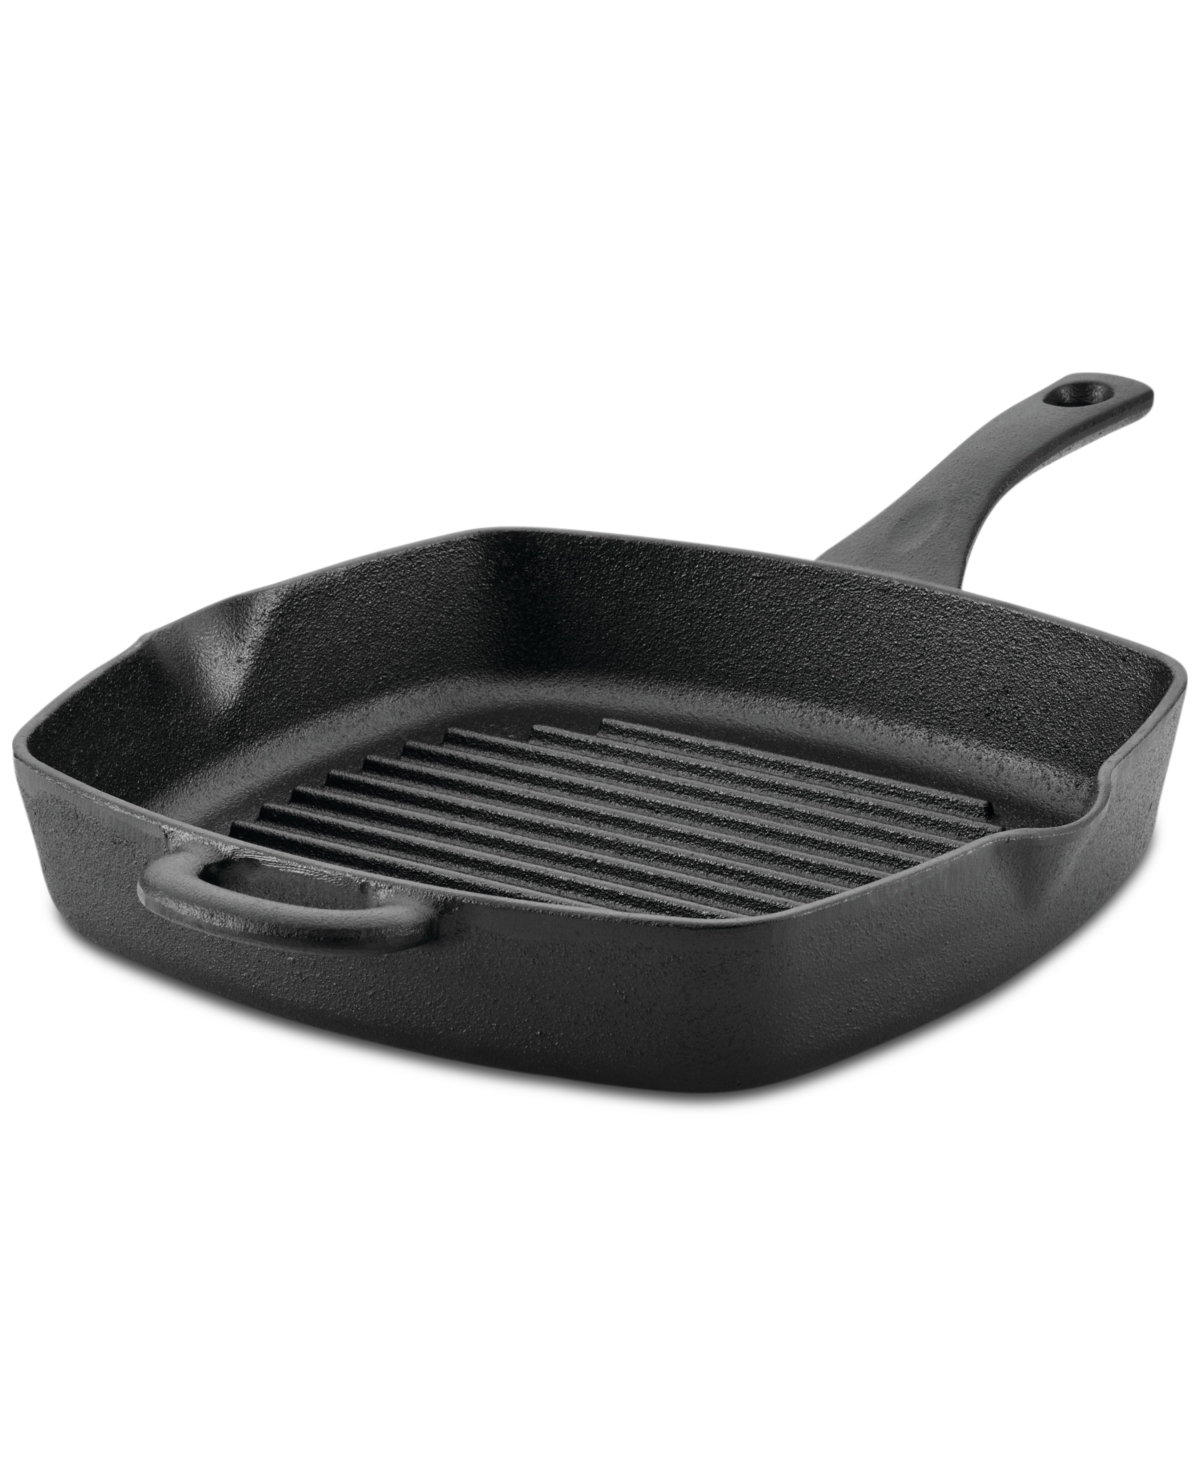 Ayesha Curry 10" Cast Iron Square Grill Pan In Black